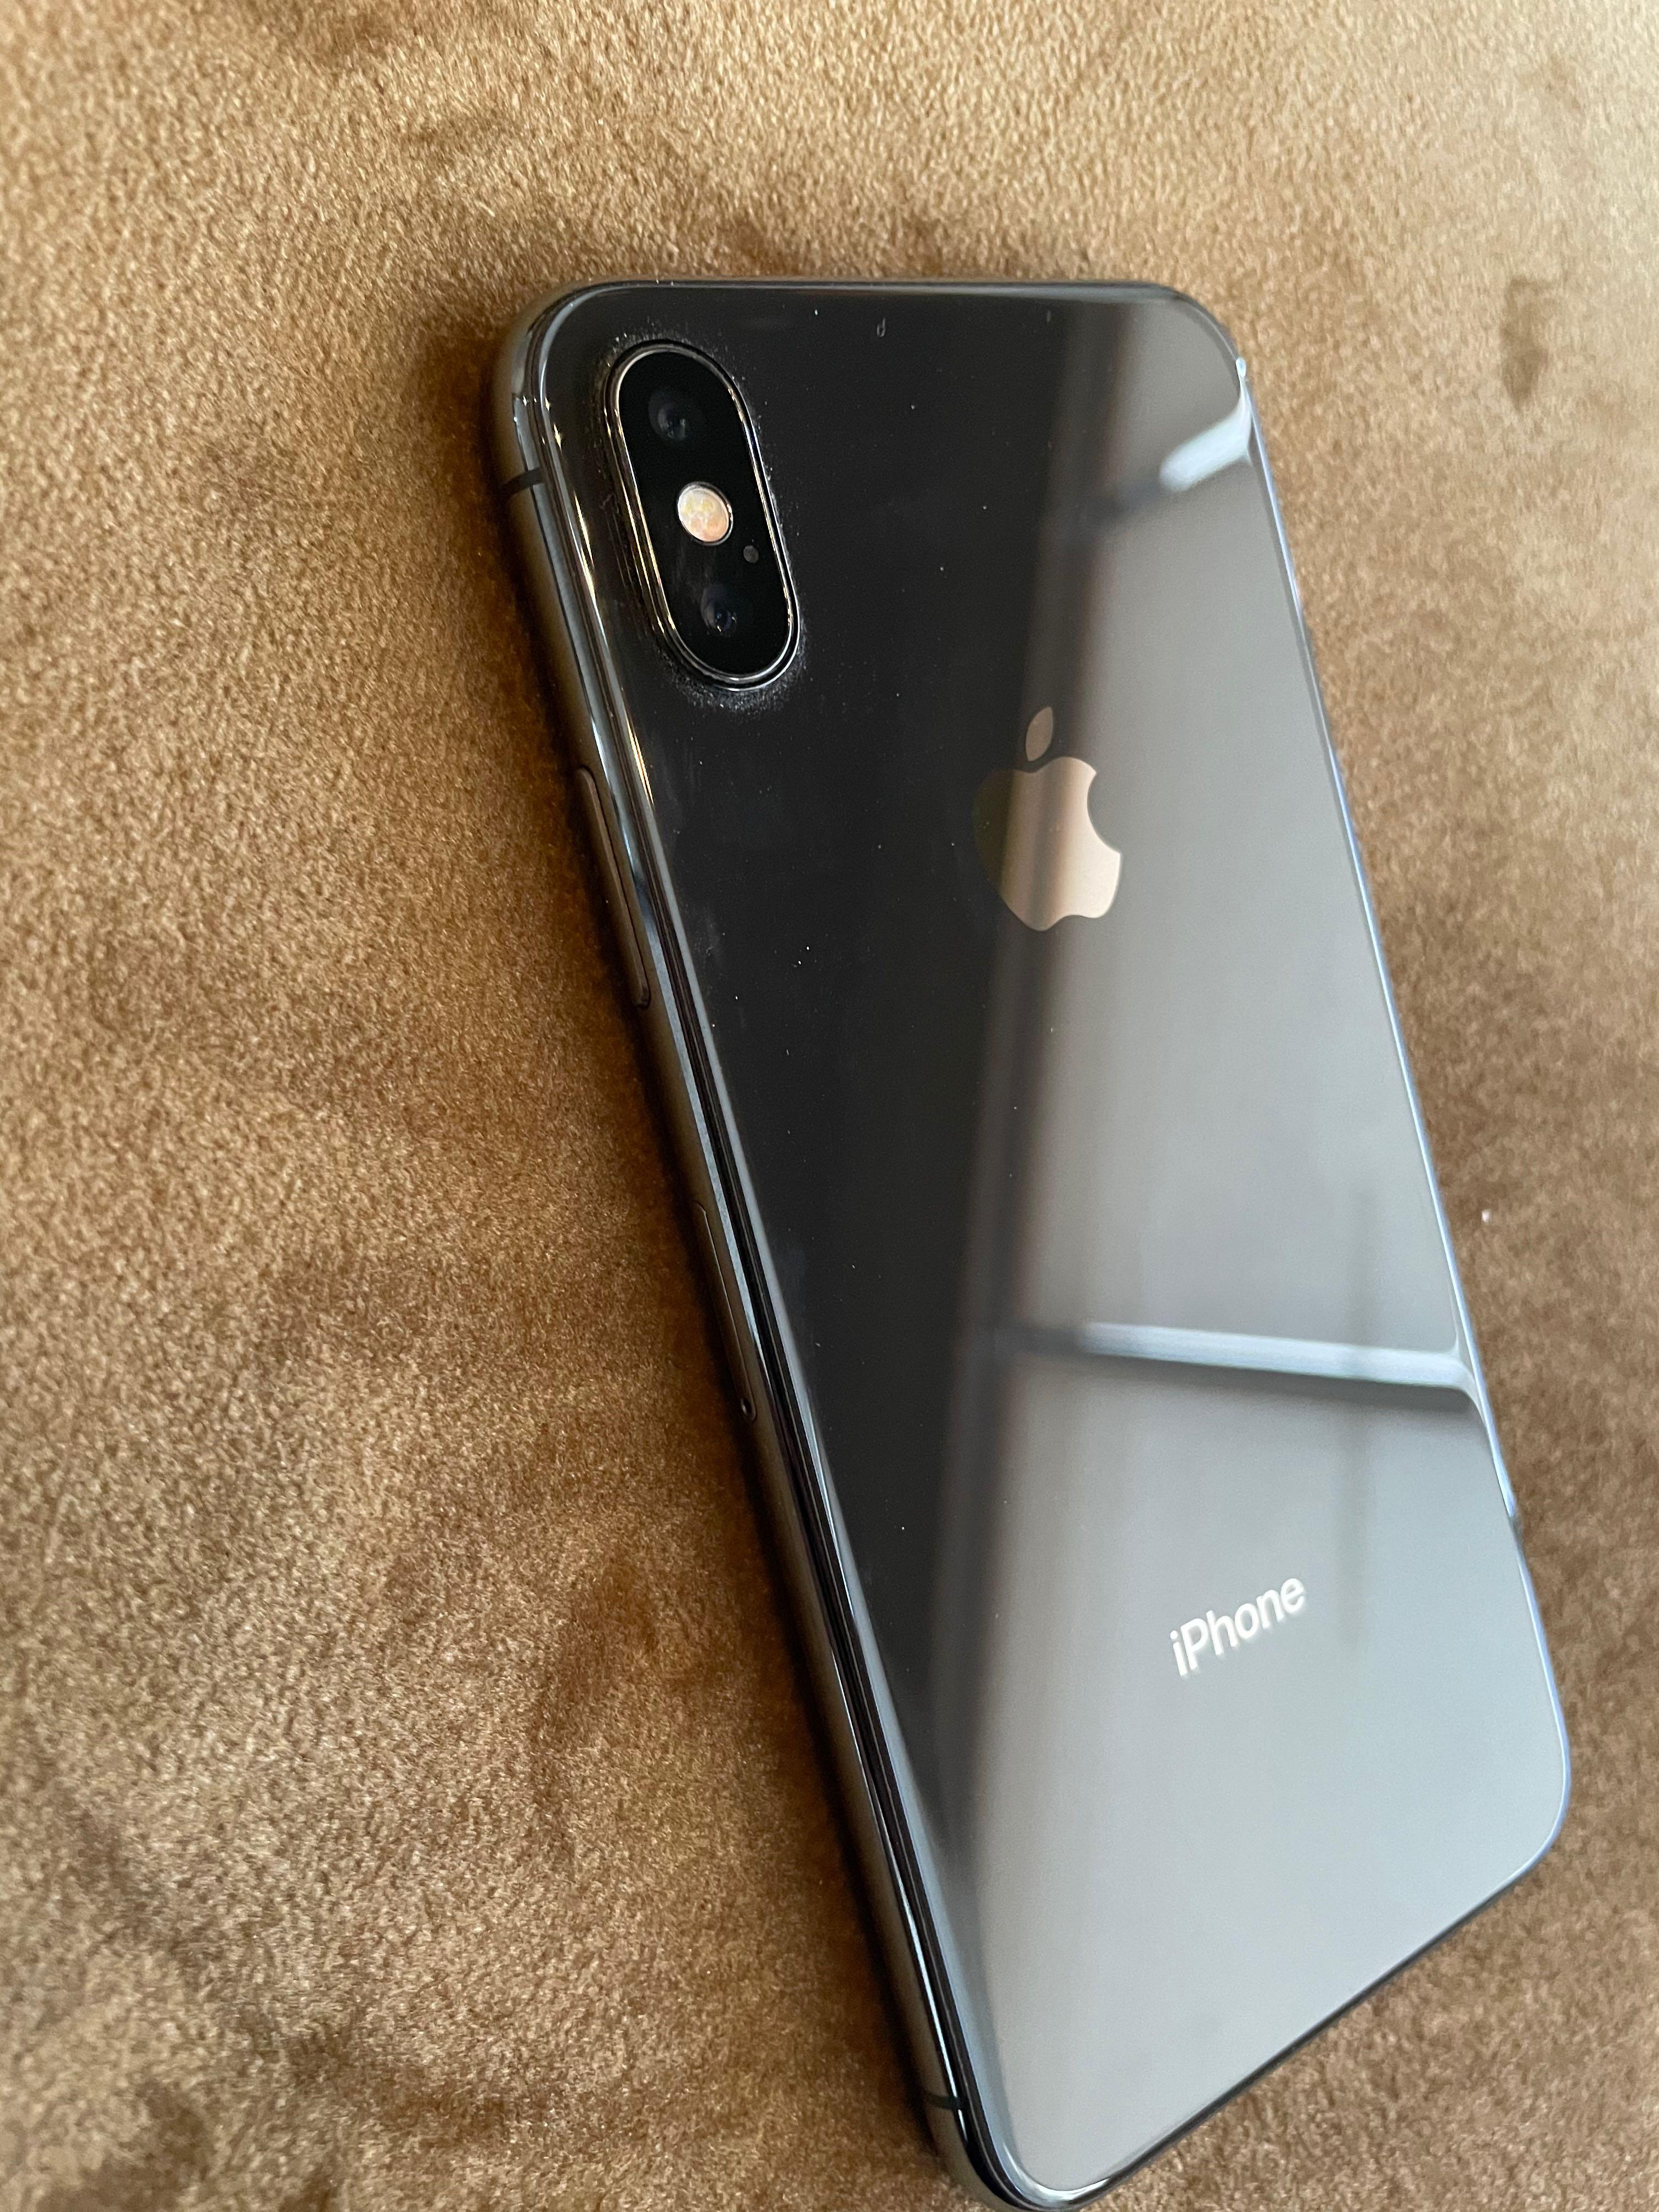 iPhone X 256GB Space Grey, Mobile Phones & Gadgets, Mobile Phones